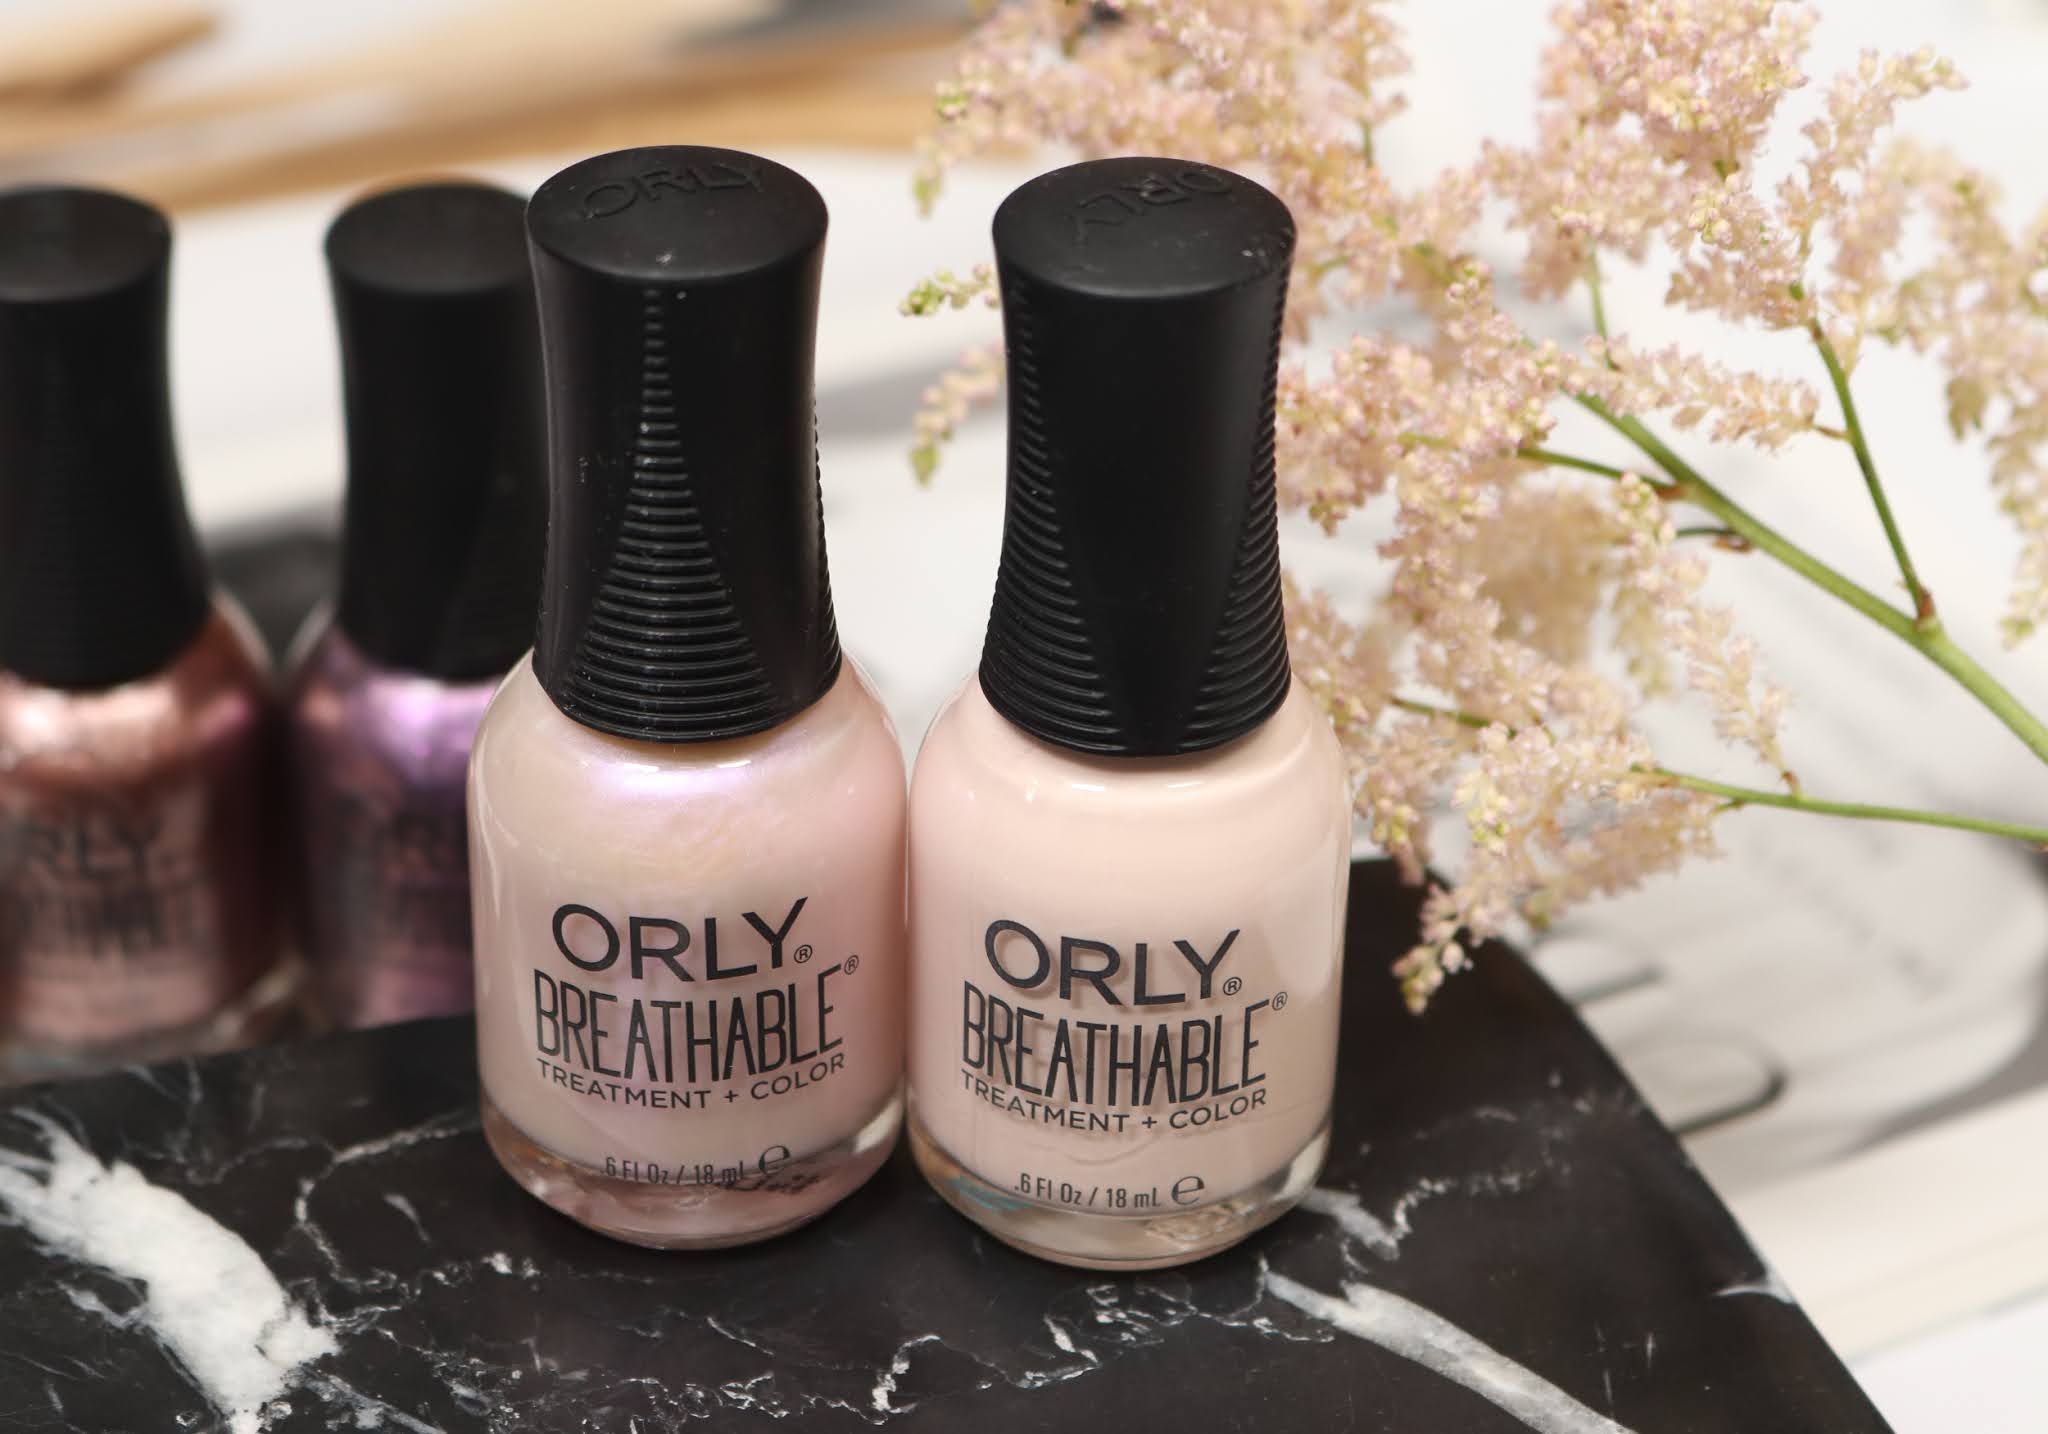 6. Orly Breathable Treatment + Color Nail Polish, Argan Oil Infused Nail Color - wide 1